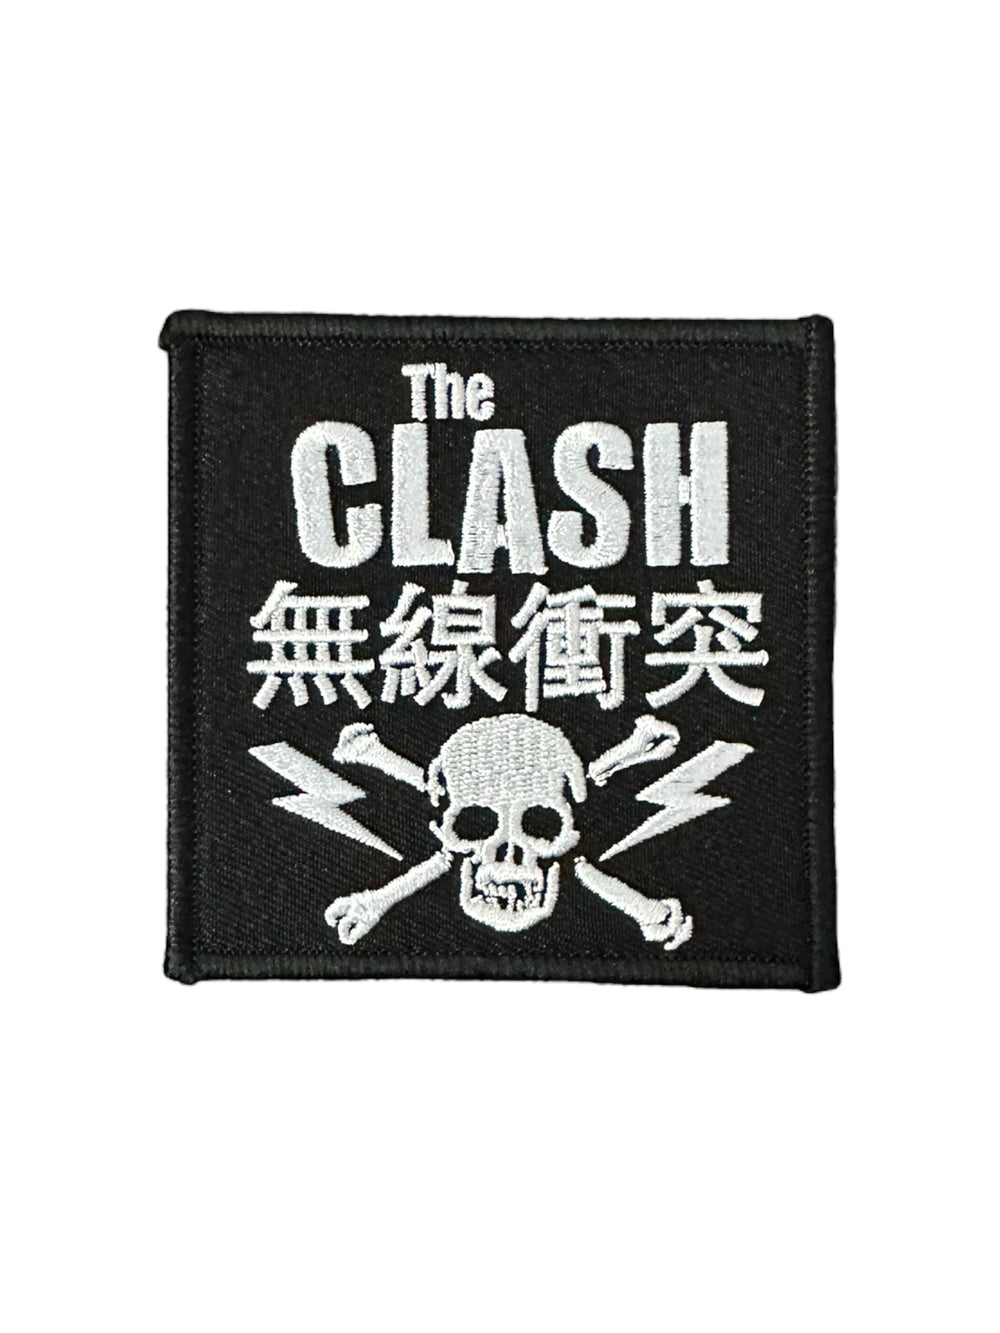 Clash Skull & Crossbones Official Woven Patch Brand New